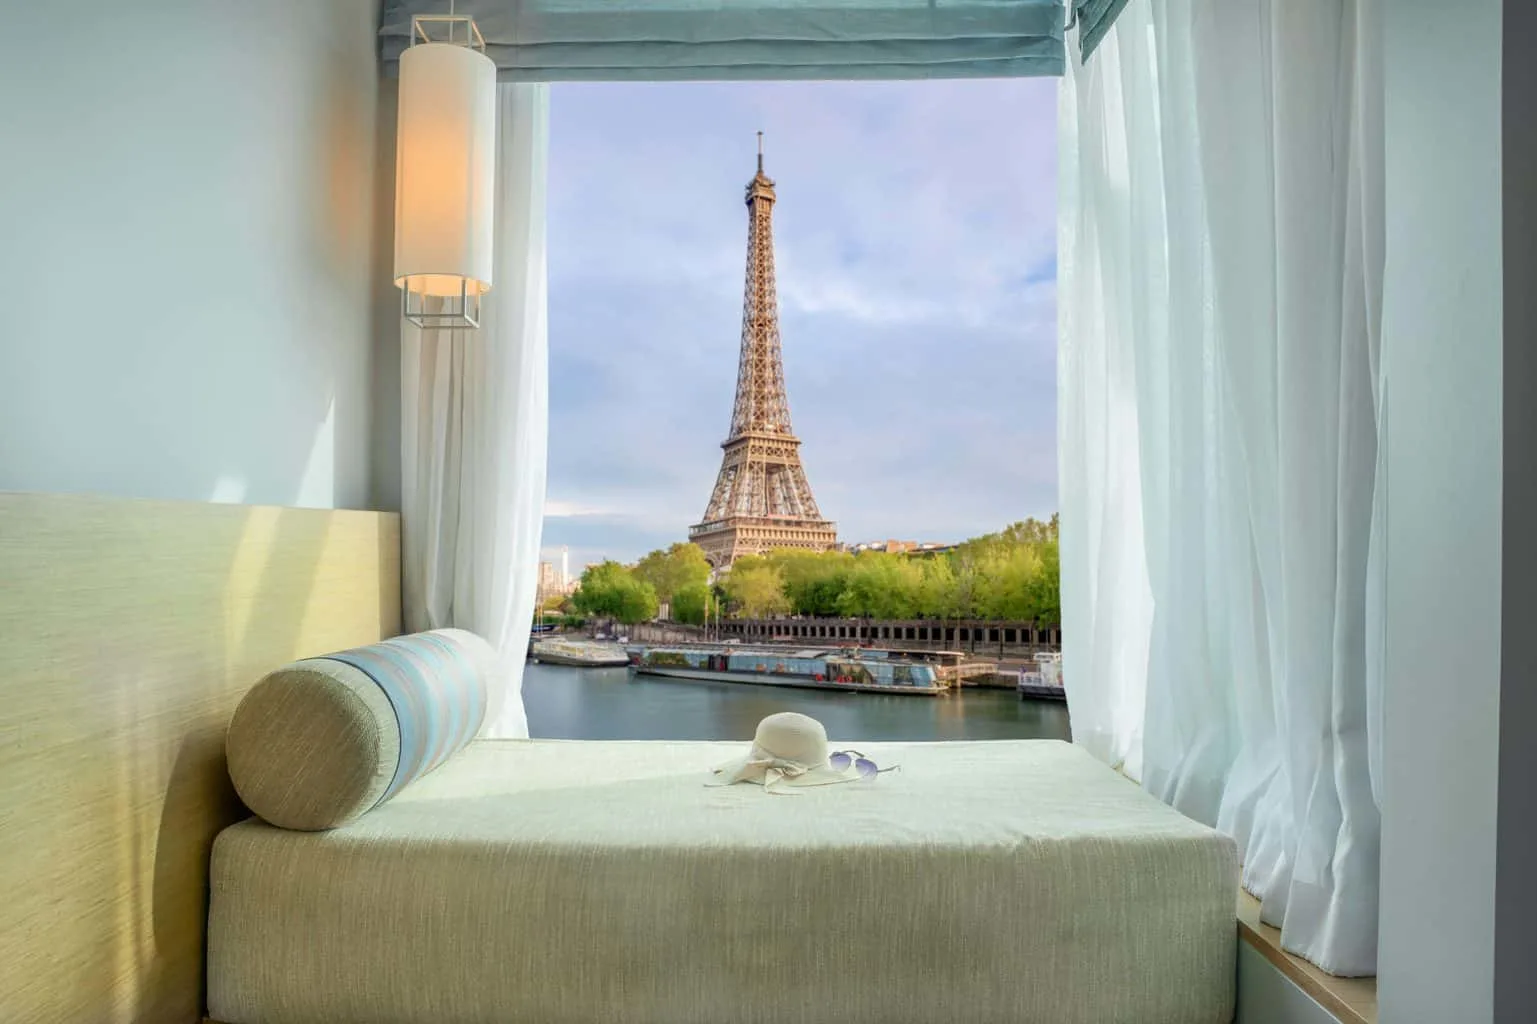 Is there anything better than a hotel room with a view of the Eiffel Tower? And in case you were wondering, the correct answer to this question is NO!